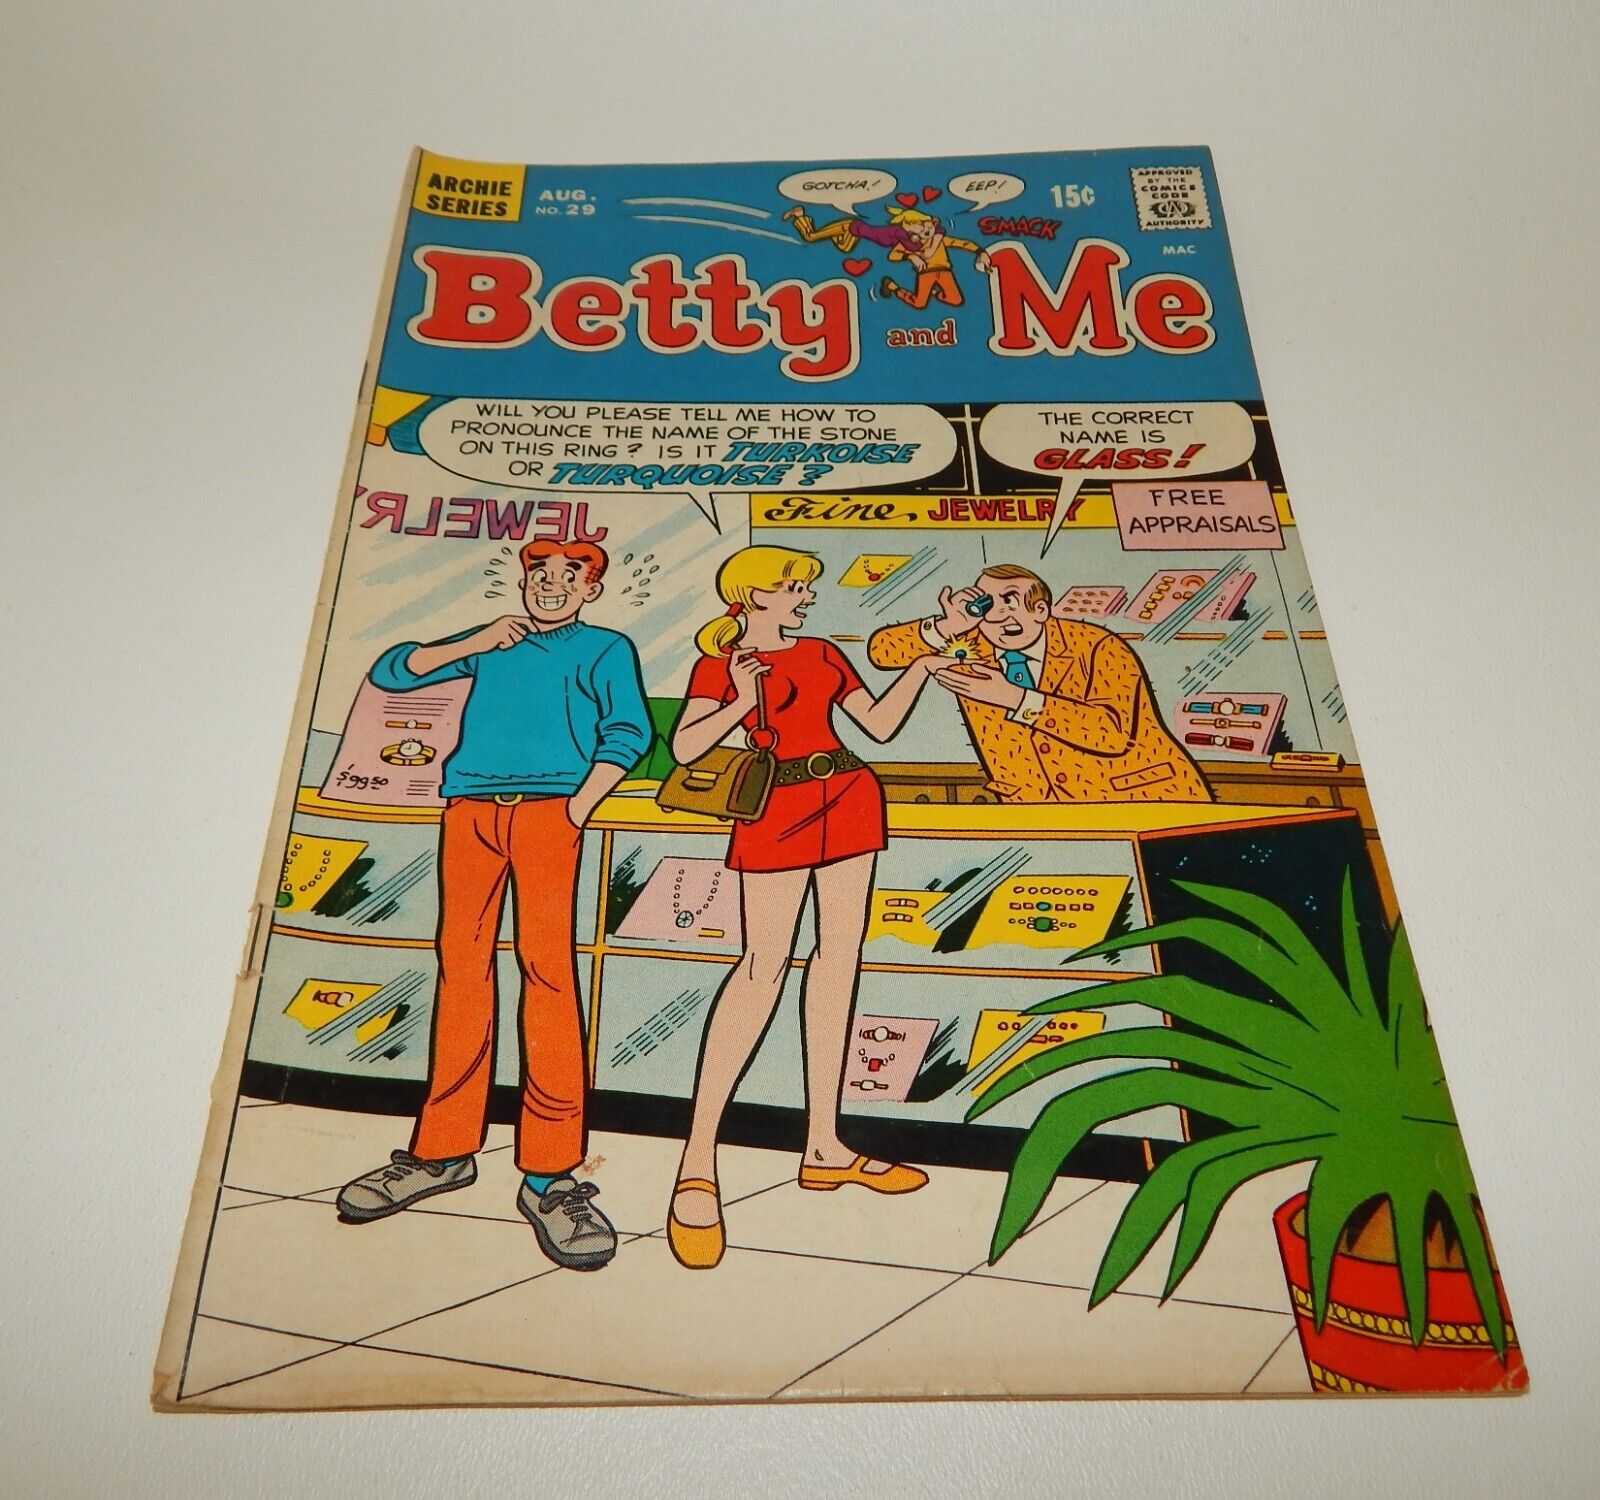 Archie Series Comic #29 - Betty and Me - Turquoise Ring